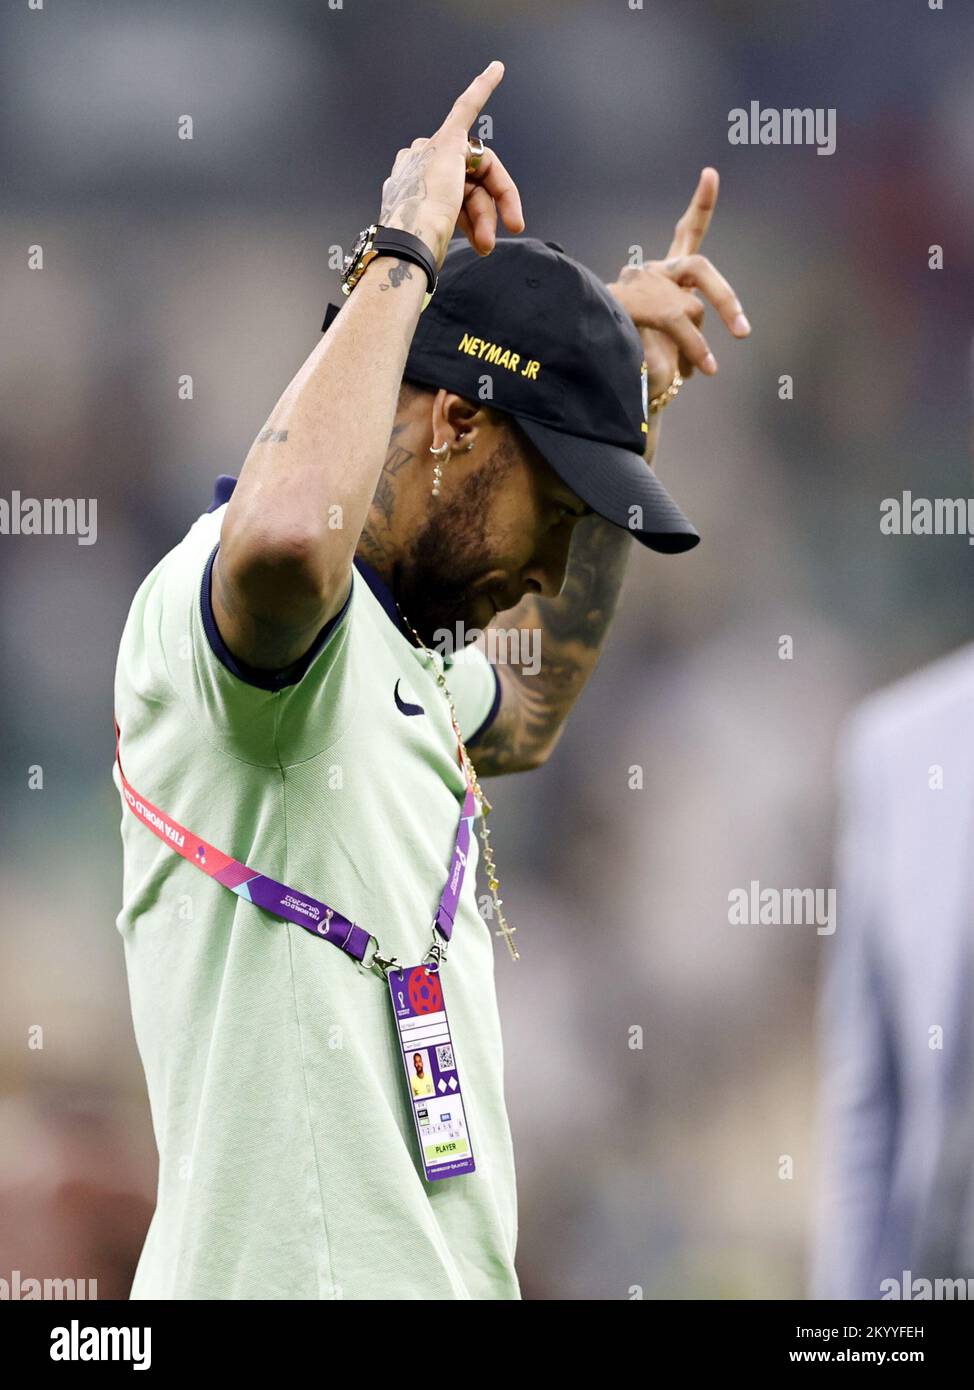 Qatar. 02nd Dec, 2022. LUSAIL CITY - Neymar of Brazil during the FIFA World Cup Qatar 2022 group G match between Cameroon and Brazil at Lusail Stadium on December 2, 2022 in Lusail City, Qatar. AP | Dutch Height | MAURICE OF STONE Credit: ANP/Alamy Live News Stock Photo